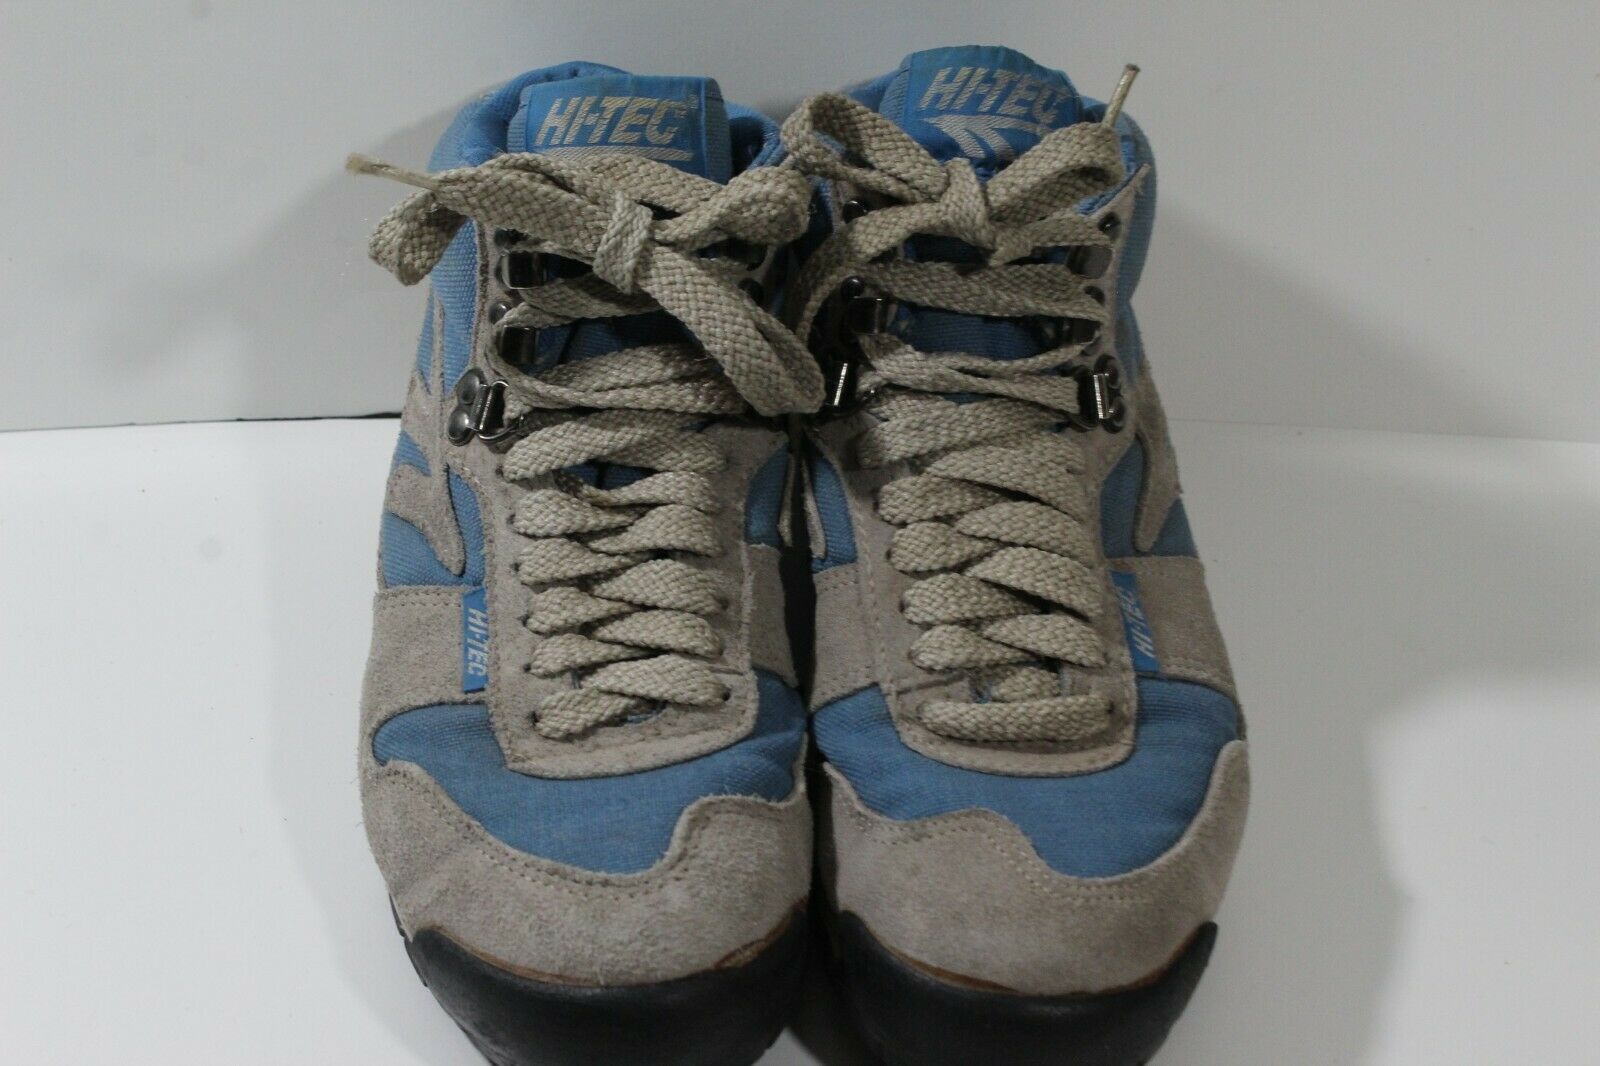 Vintage Hi-Tec Men's Hiking Boots Size 7.5 Suede Lace Sneaker Made in Korea (r1)